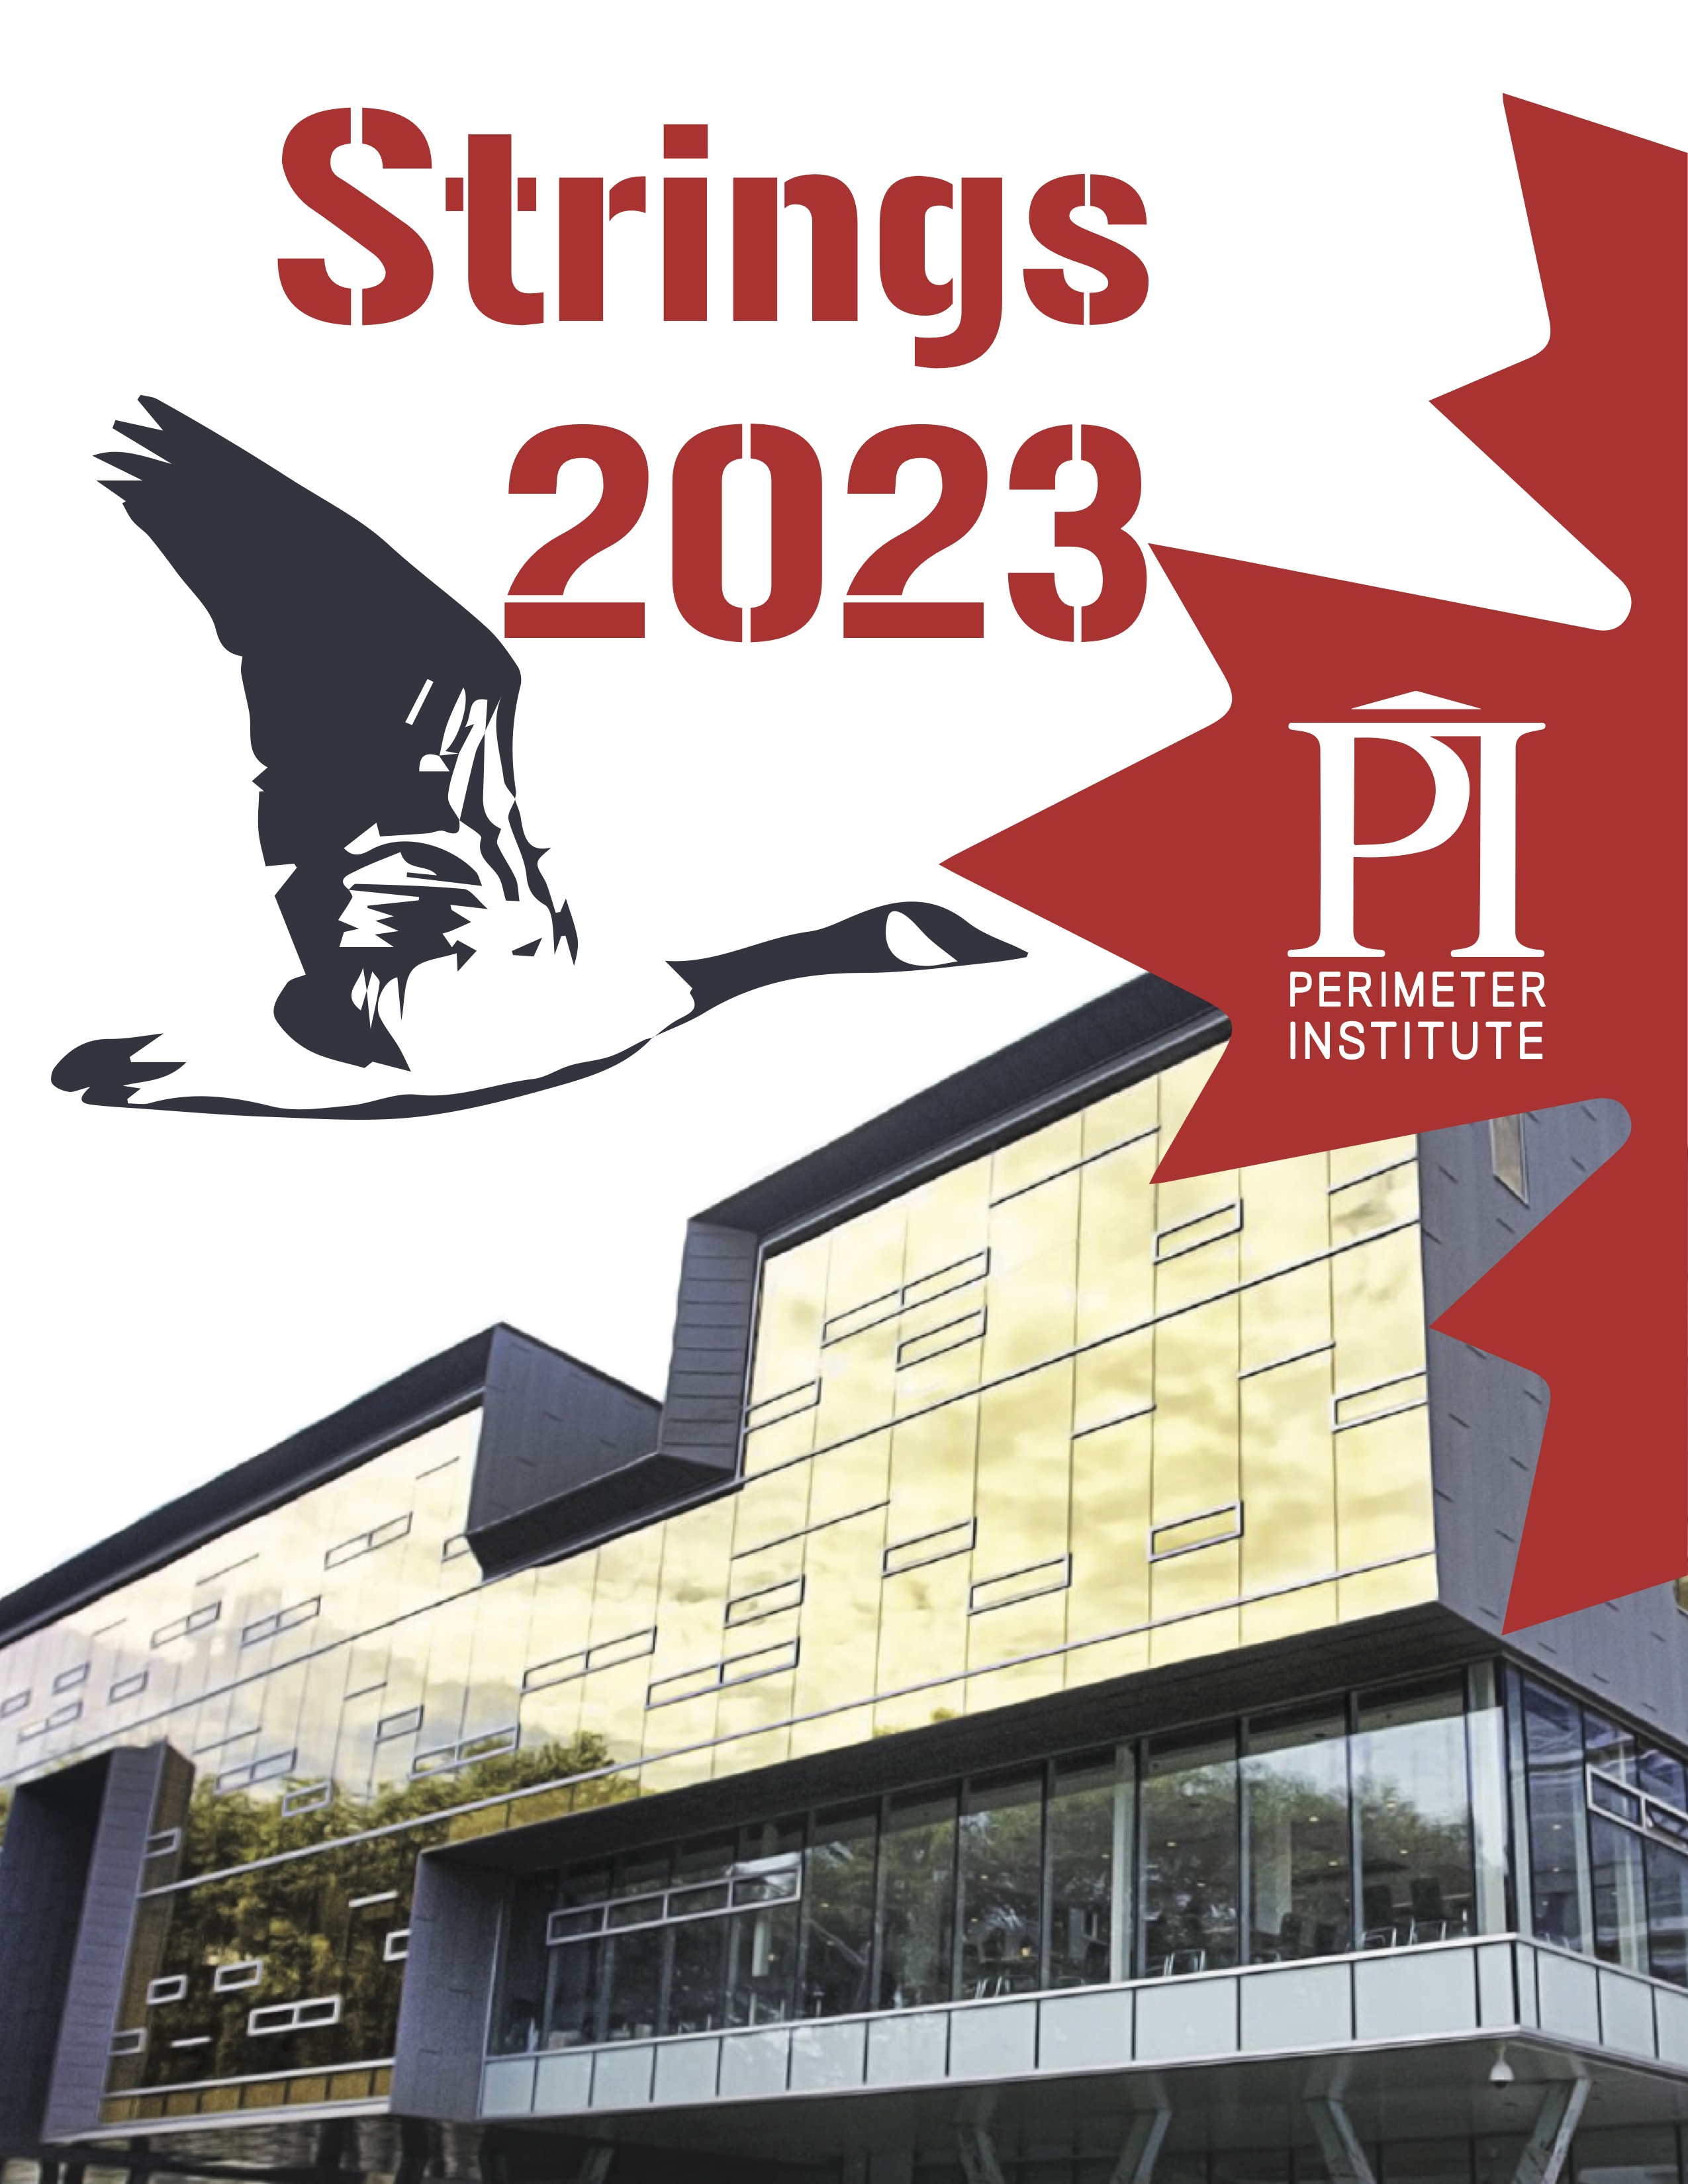 Conference poster that says Strings 2023 with an illustration of a goose flying over a building